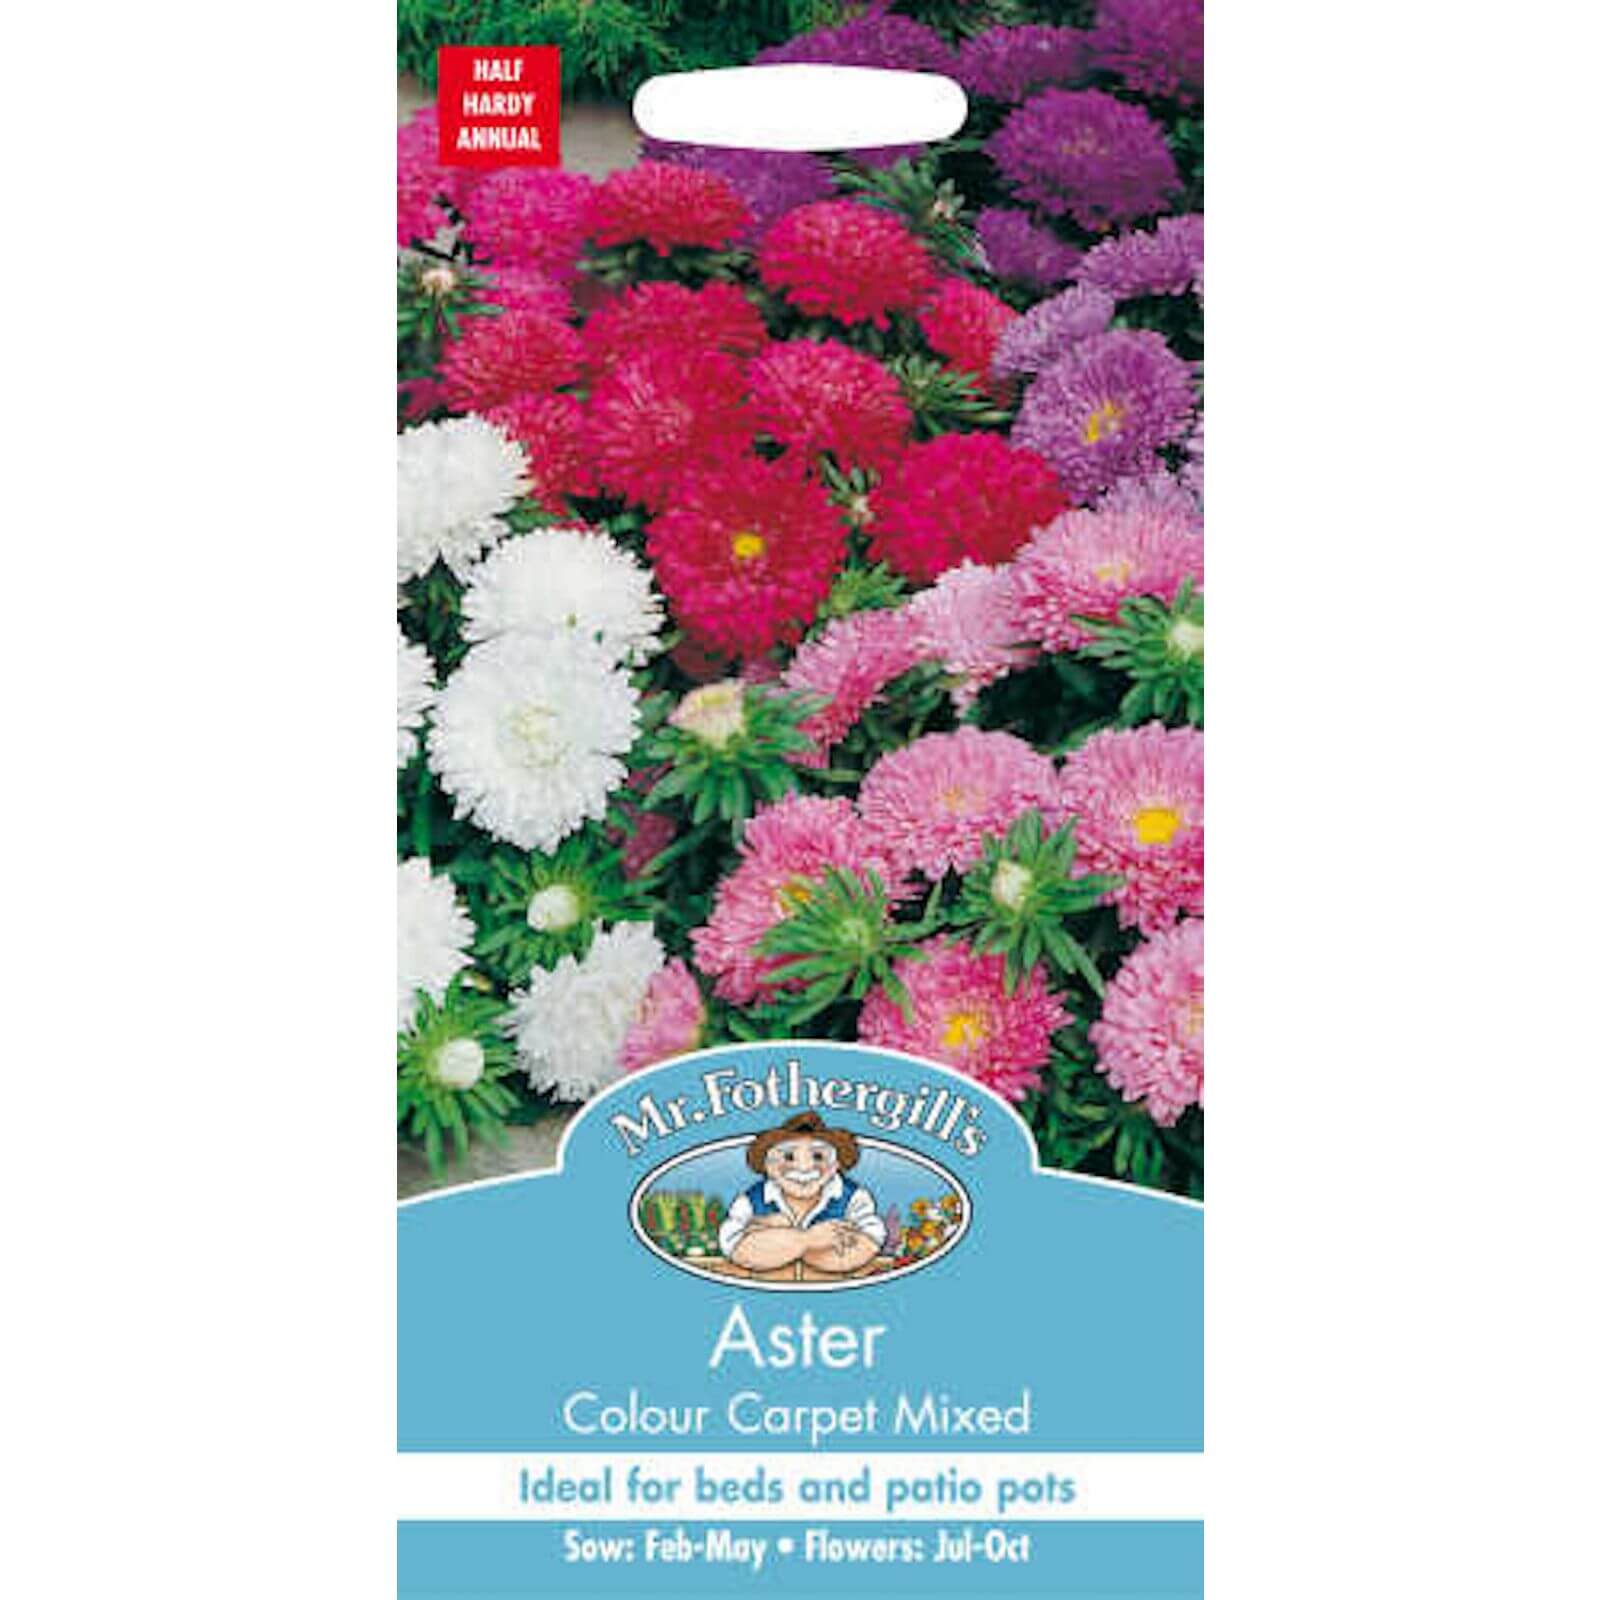 Mr. Fothergill's Aster Colour Carpet Mixed Seeds